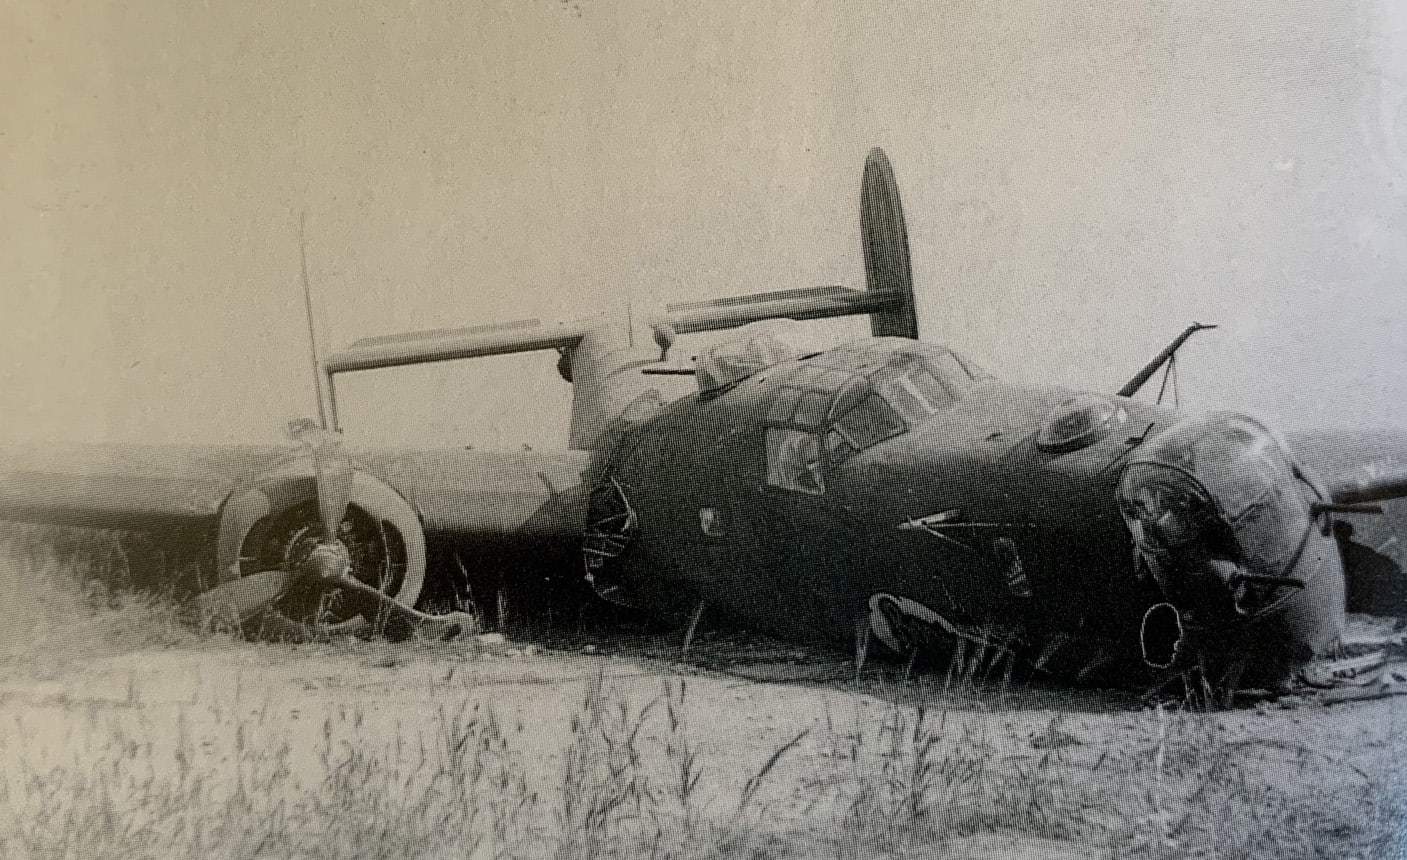 Wreckage of aircraft